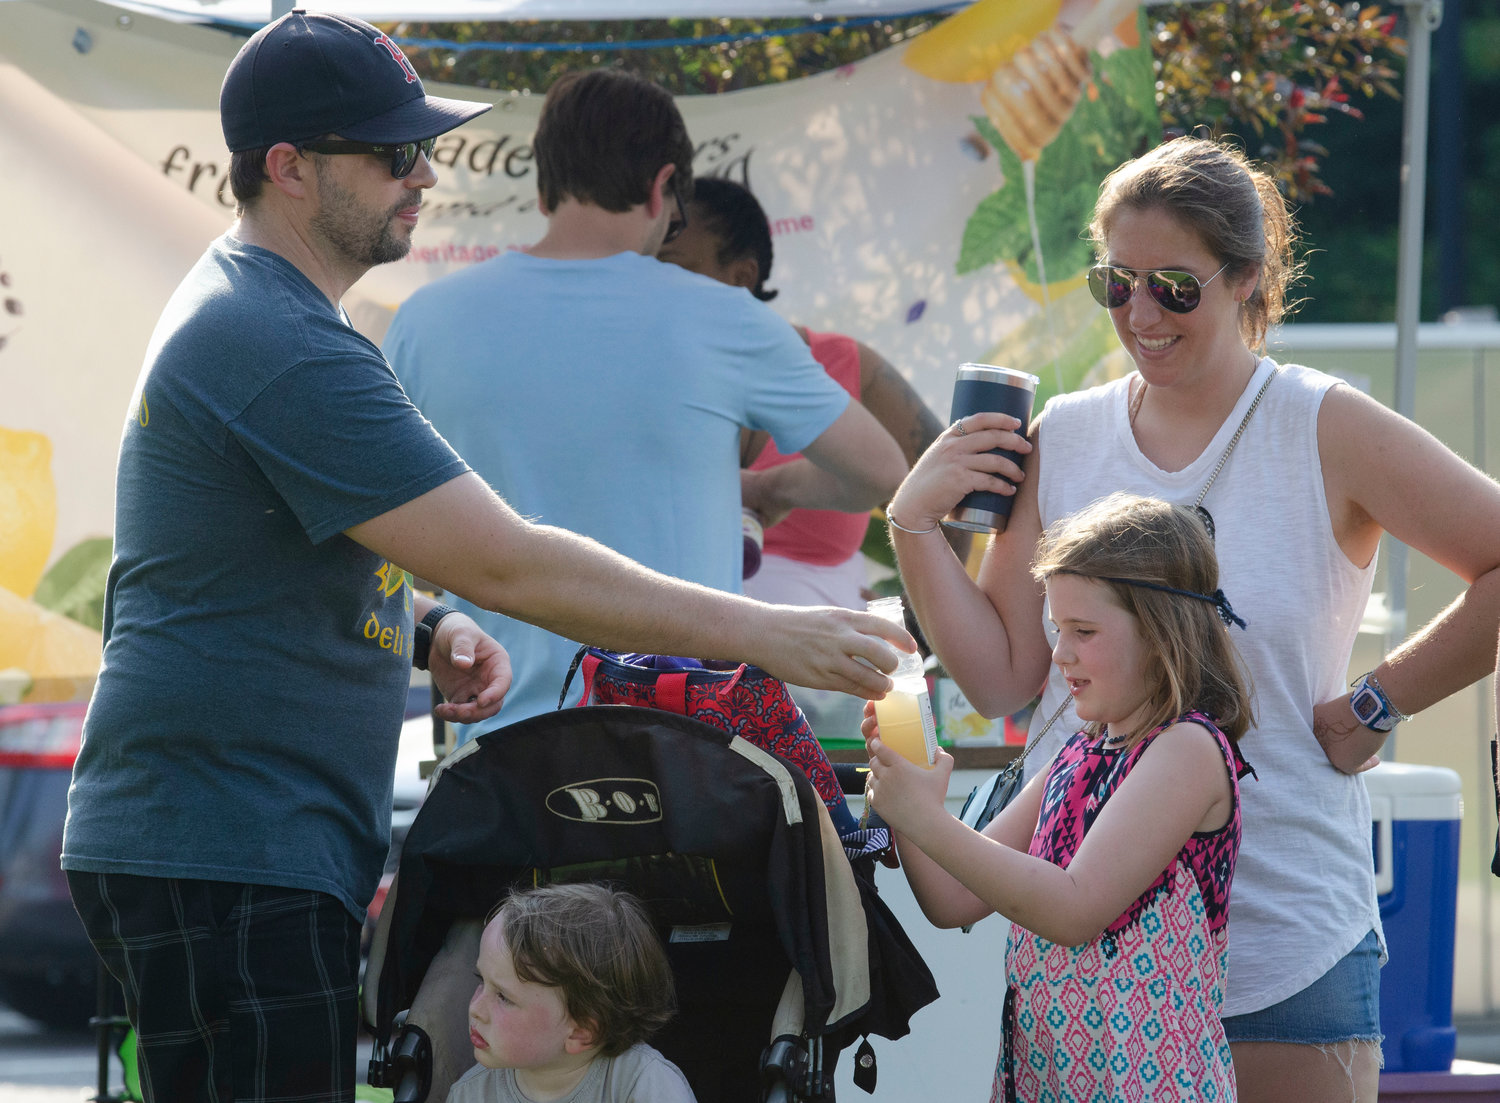 Alex Horvet hands his daughter Adelaine a lemonade, while Olivia Pawlyk looks on and James Horvet hangs out in a stroller during last week’s block party at Police Cove Park.